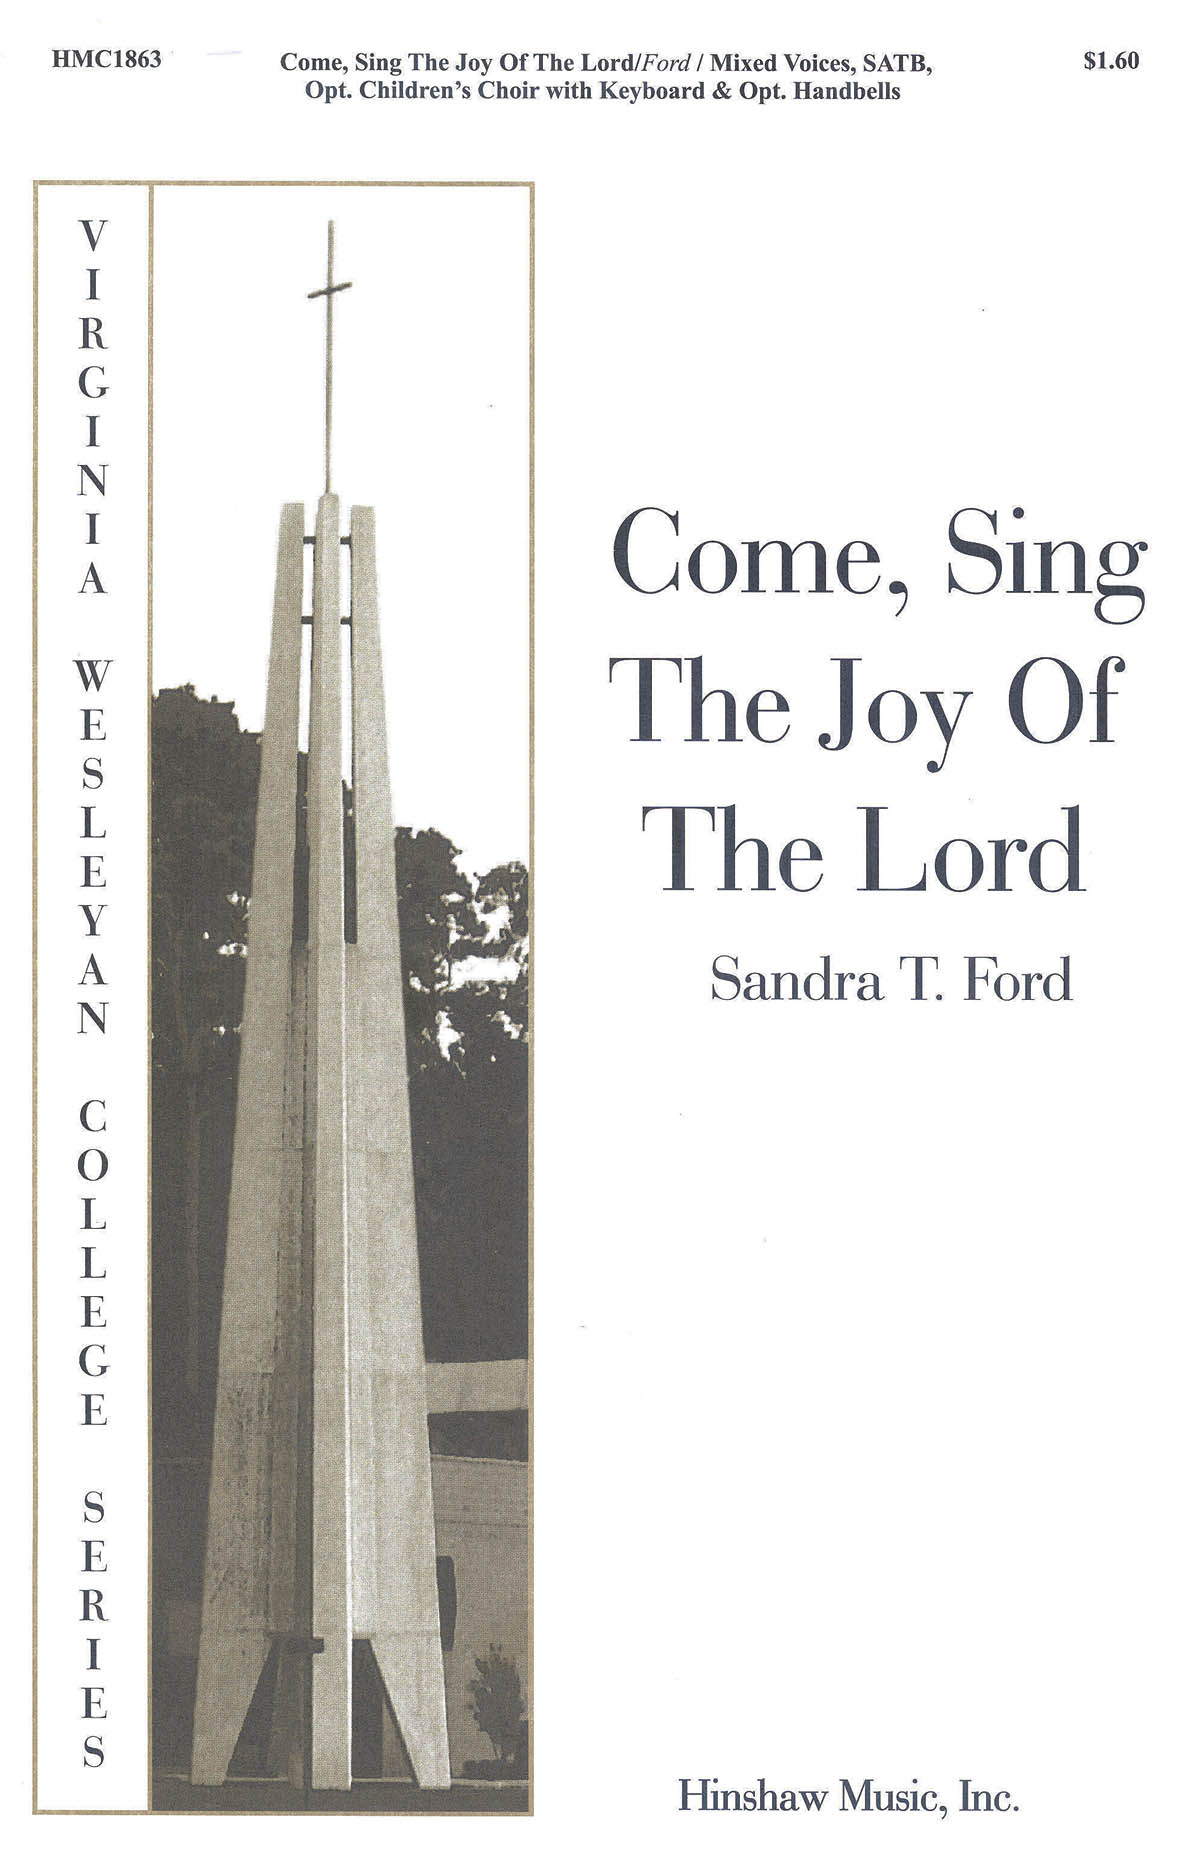 Sandra T. Ford: Come Sing The Joy Of The Lord: SATB: Vocal Score